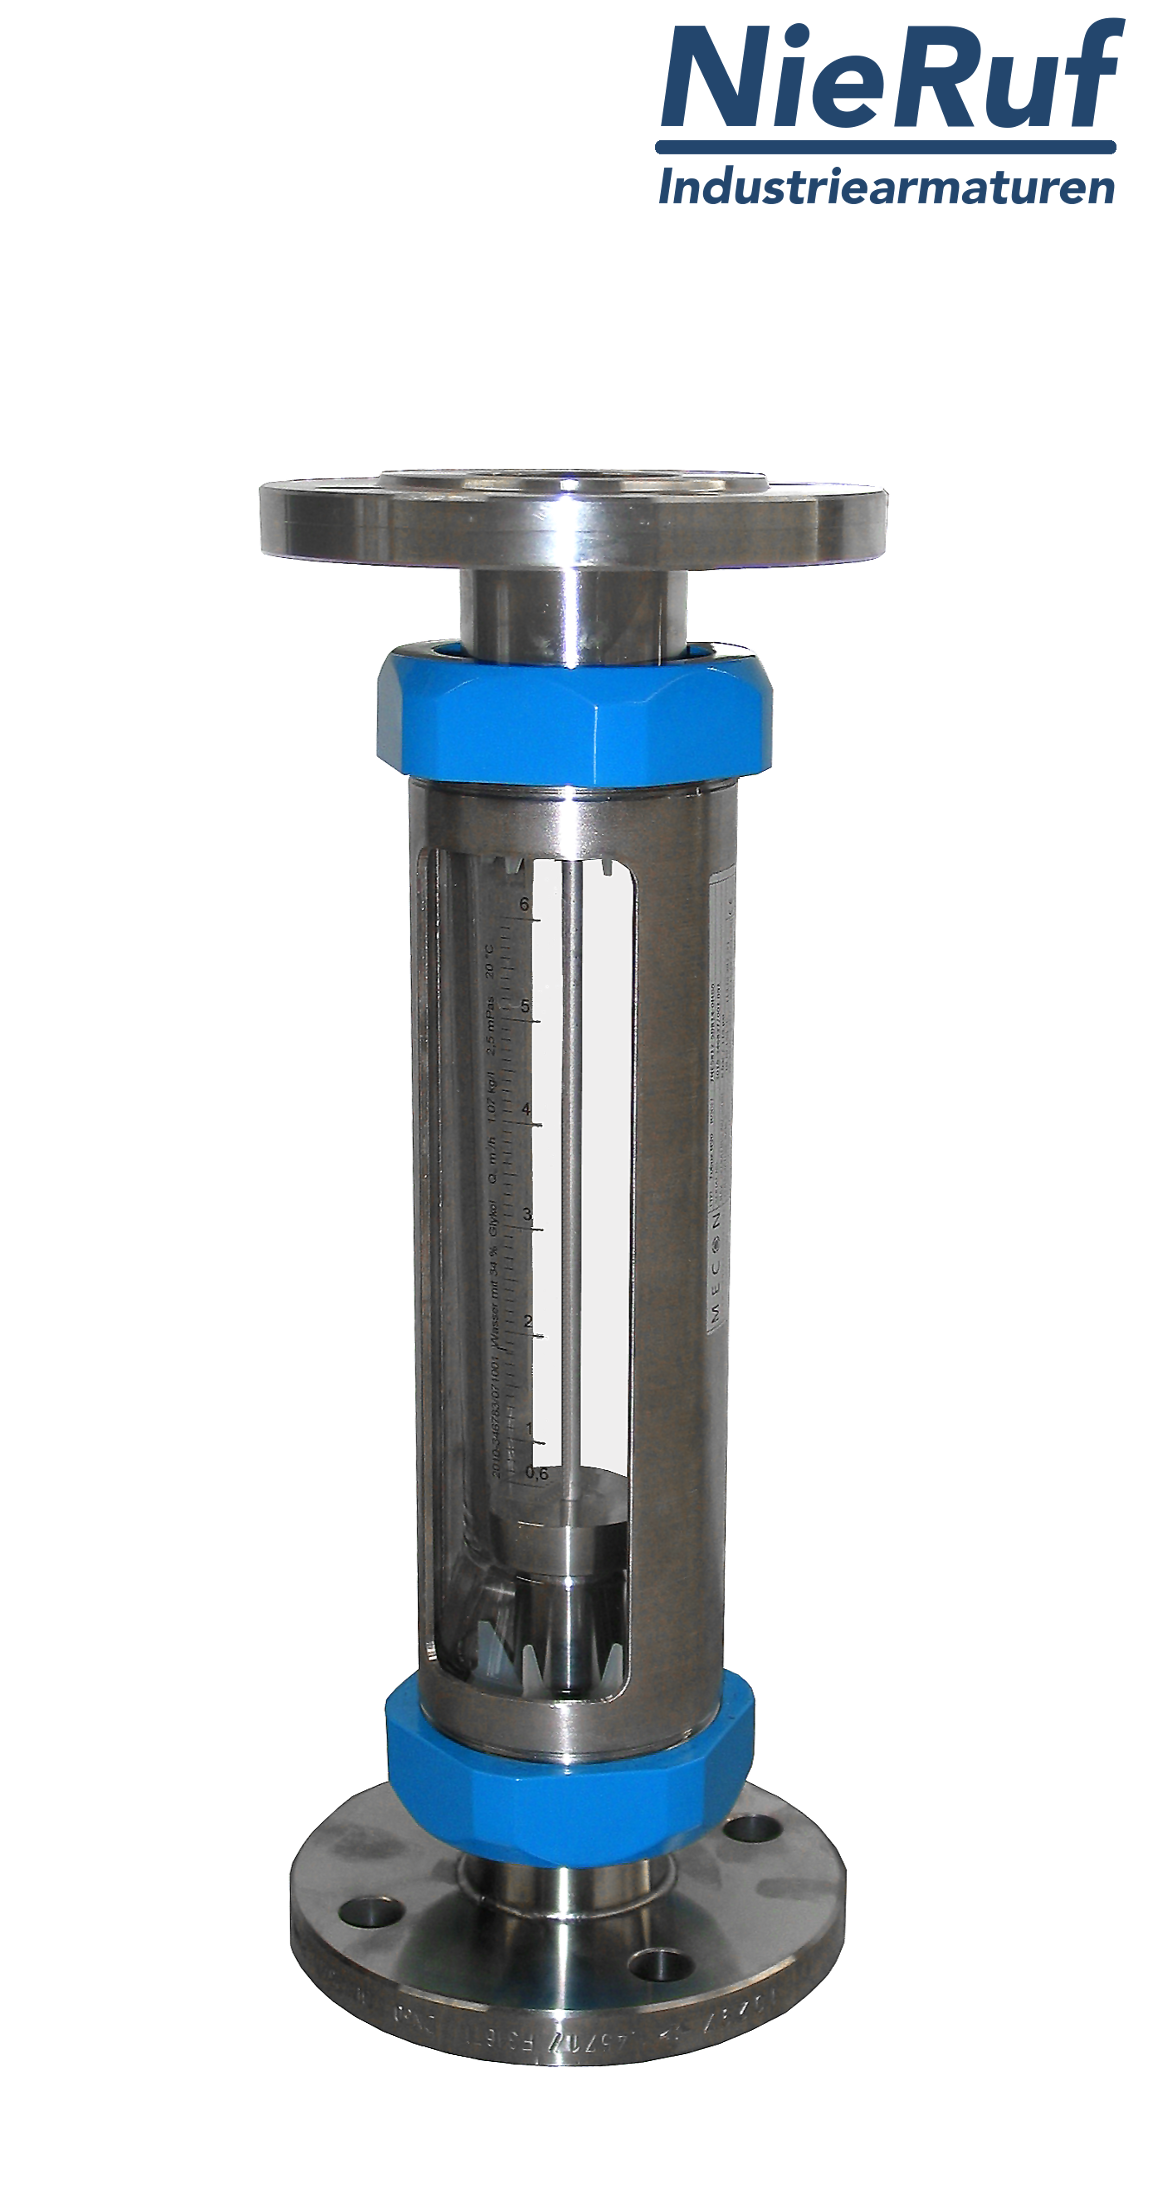 Variable area flowmeter stainless steel + borosilicate flange DN40 500.0 - 5000 l/h water FKM